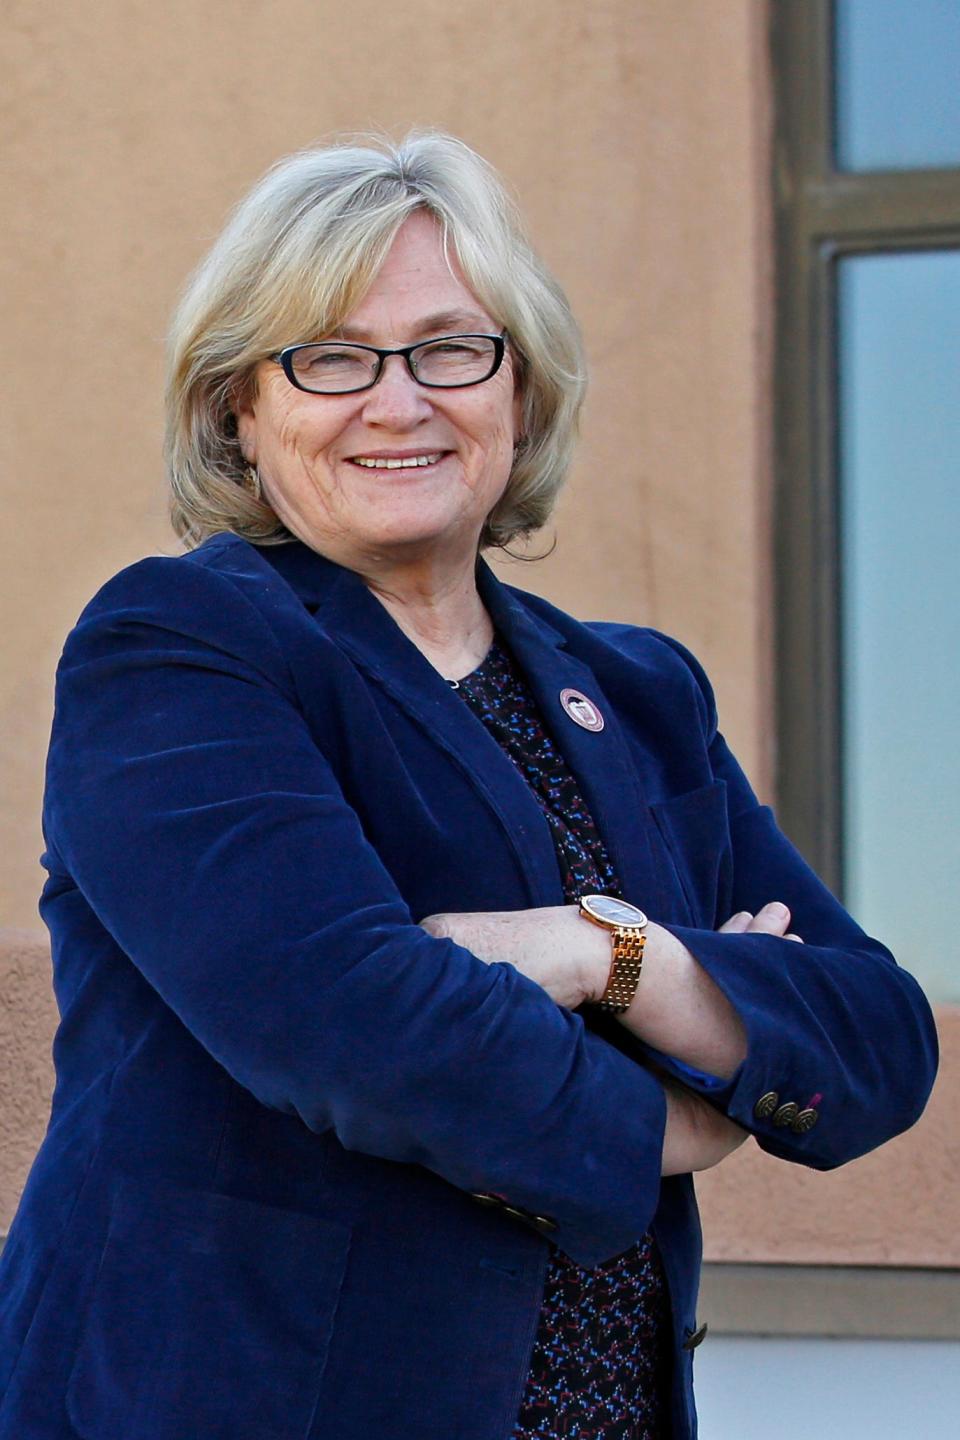 Kathryn Hansen, Director and Chief Executive Officer of New Mexico State University's Arrowhead Center.